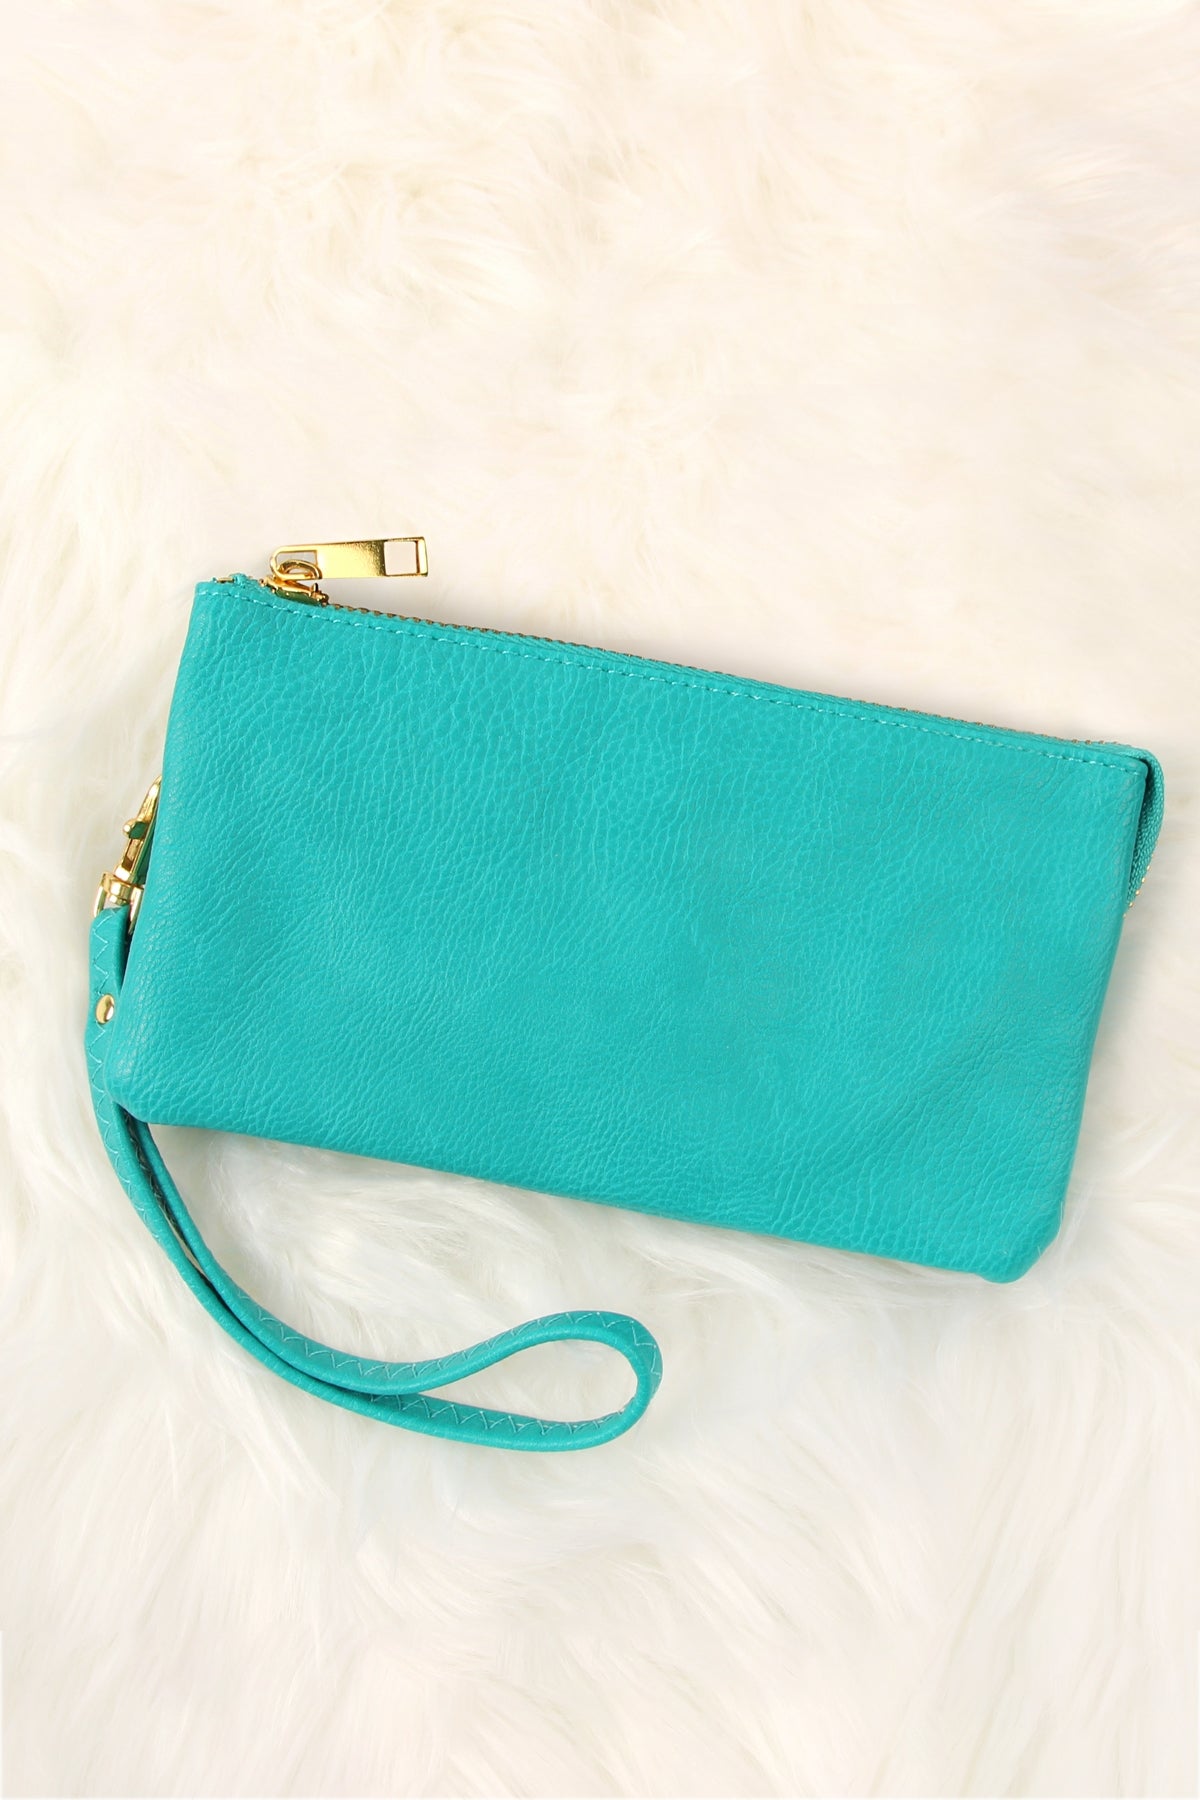 Leather Wallet with Detachable Wristlet in Turquoise